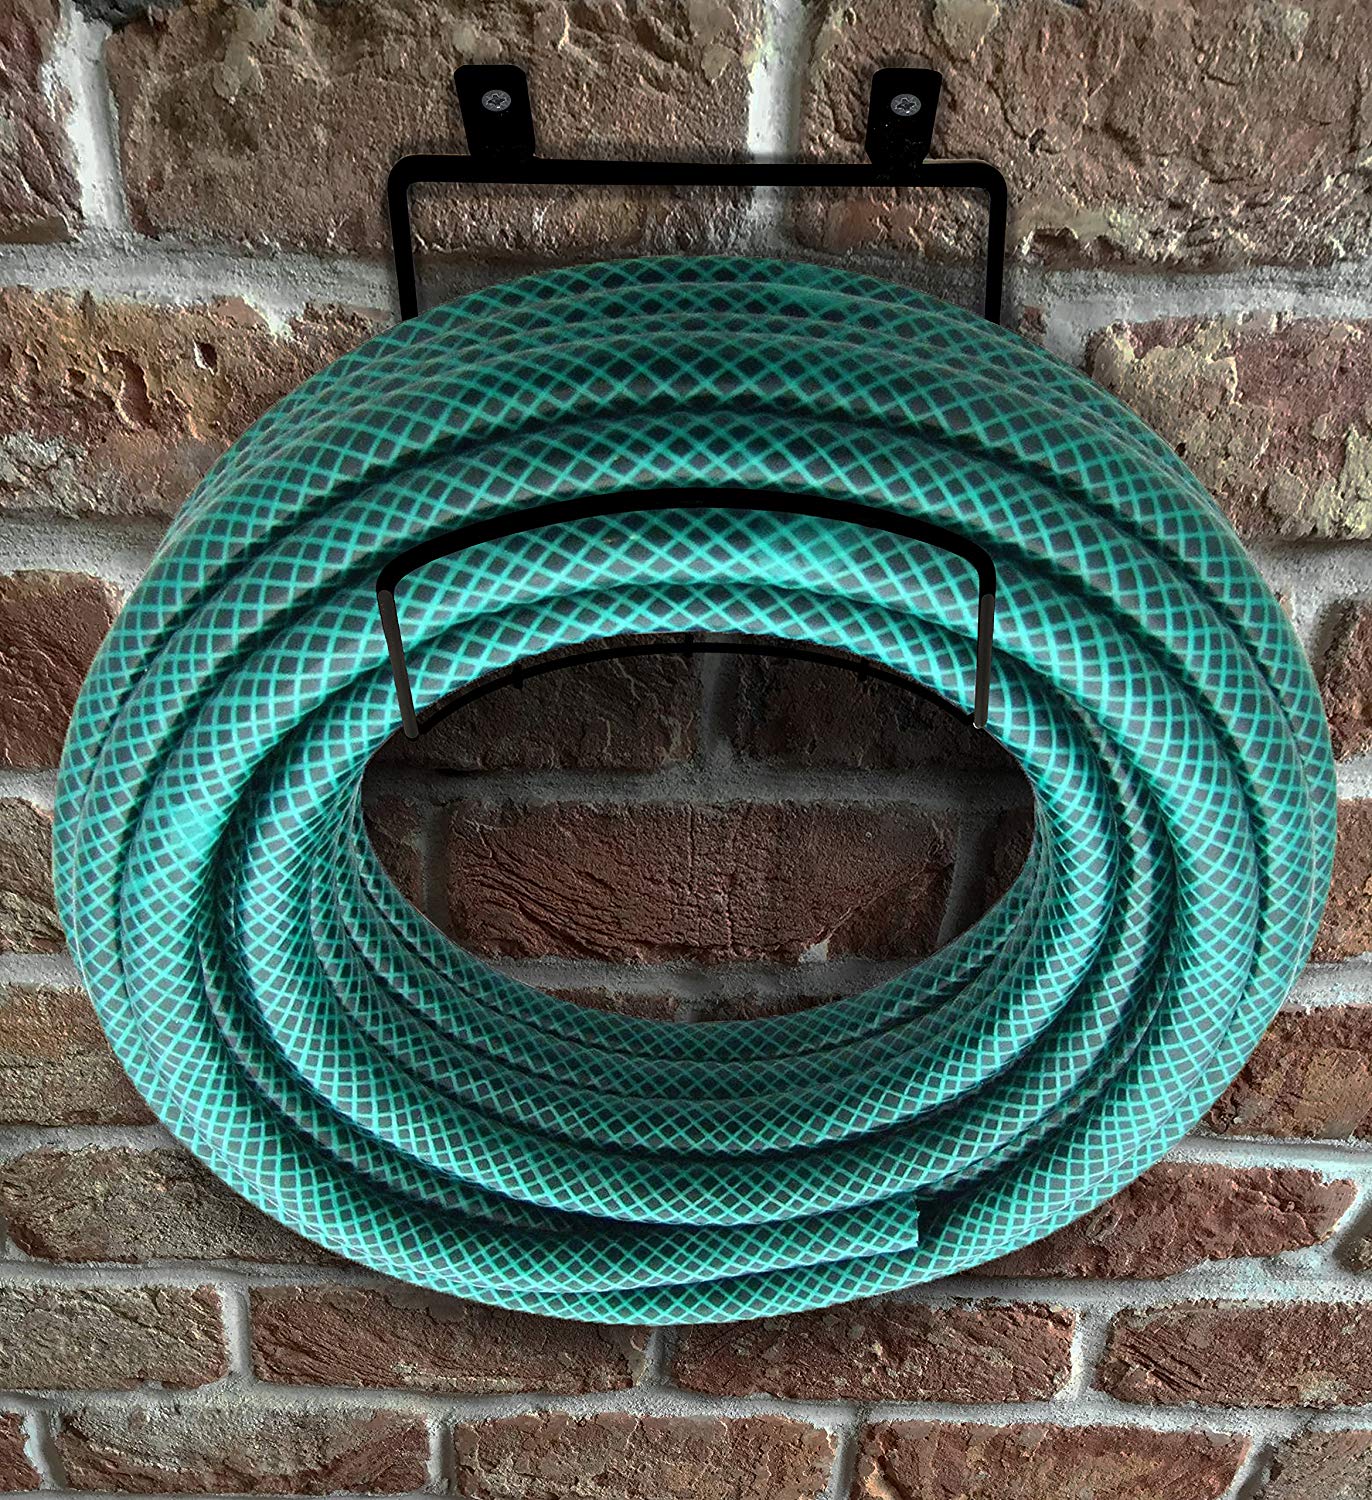 Brackit Garden Hose Holder – Cast Iron – Secure to your Wall with Fittings Included